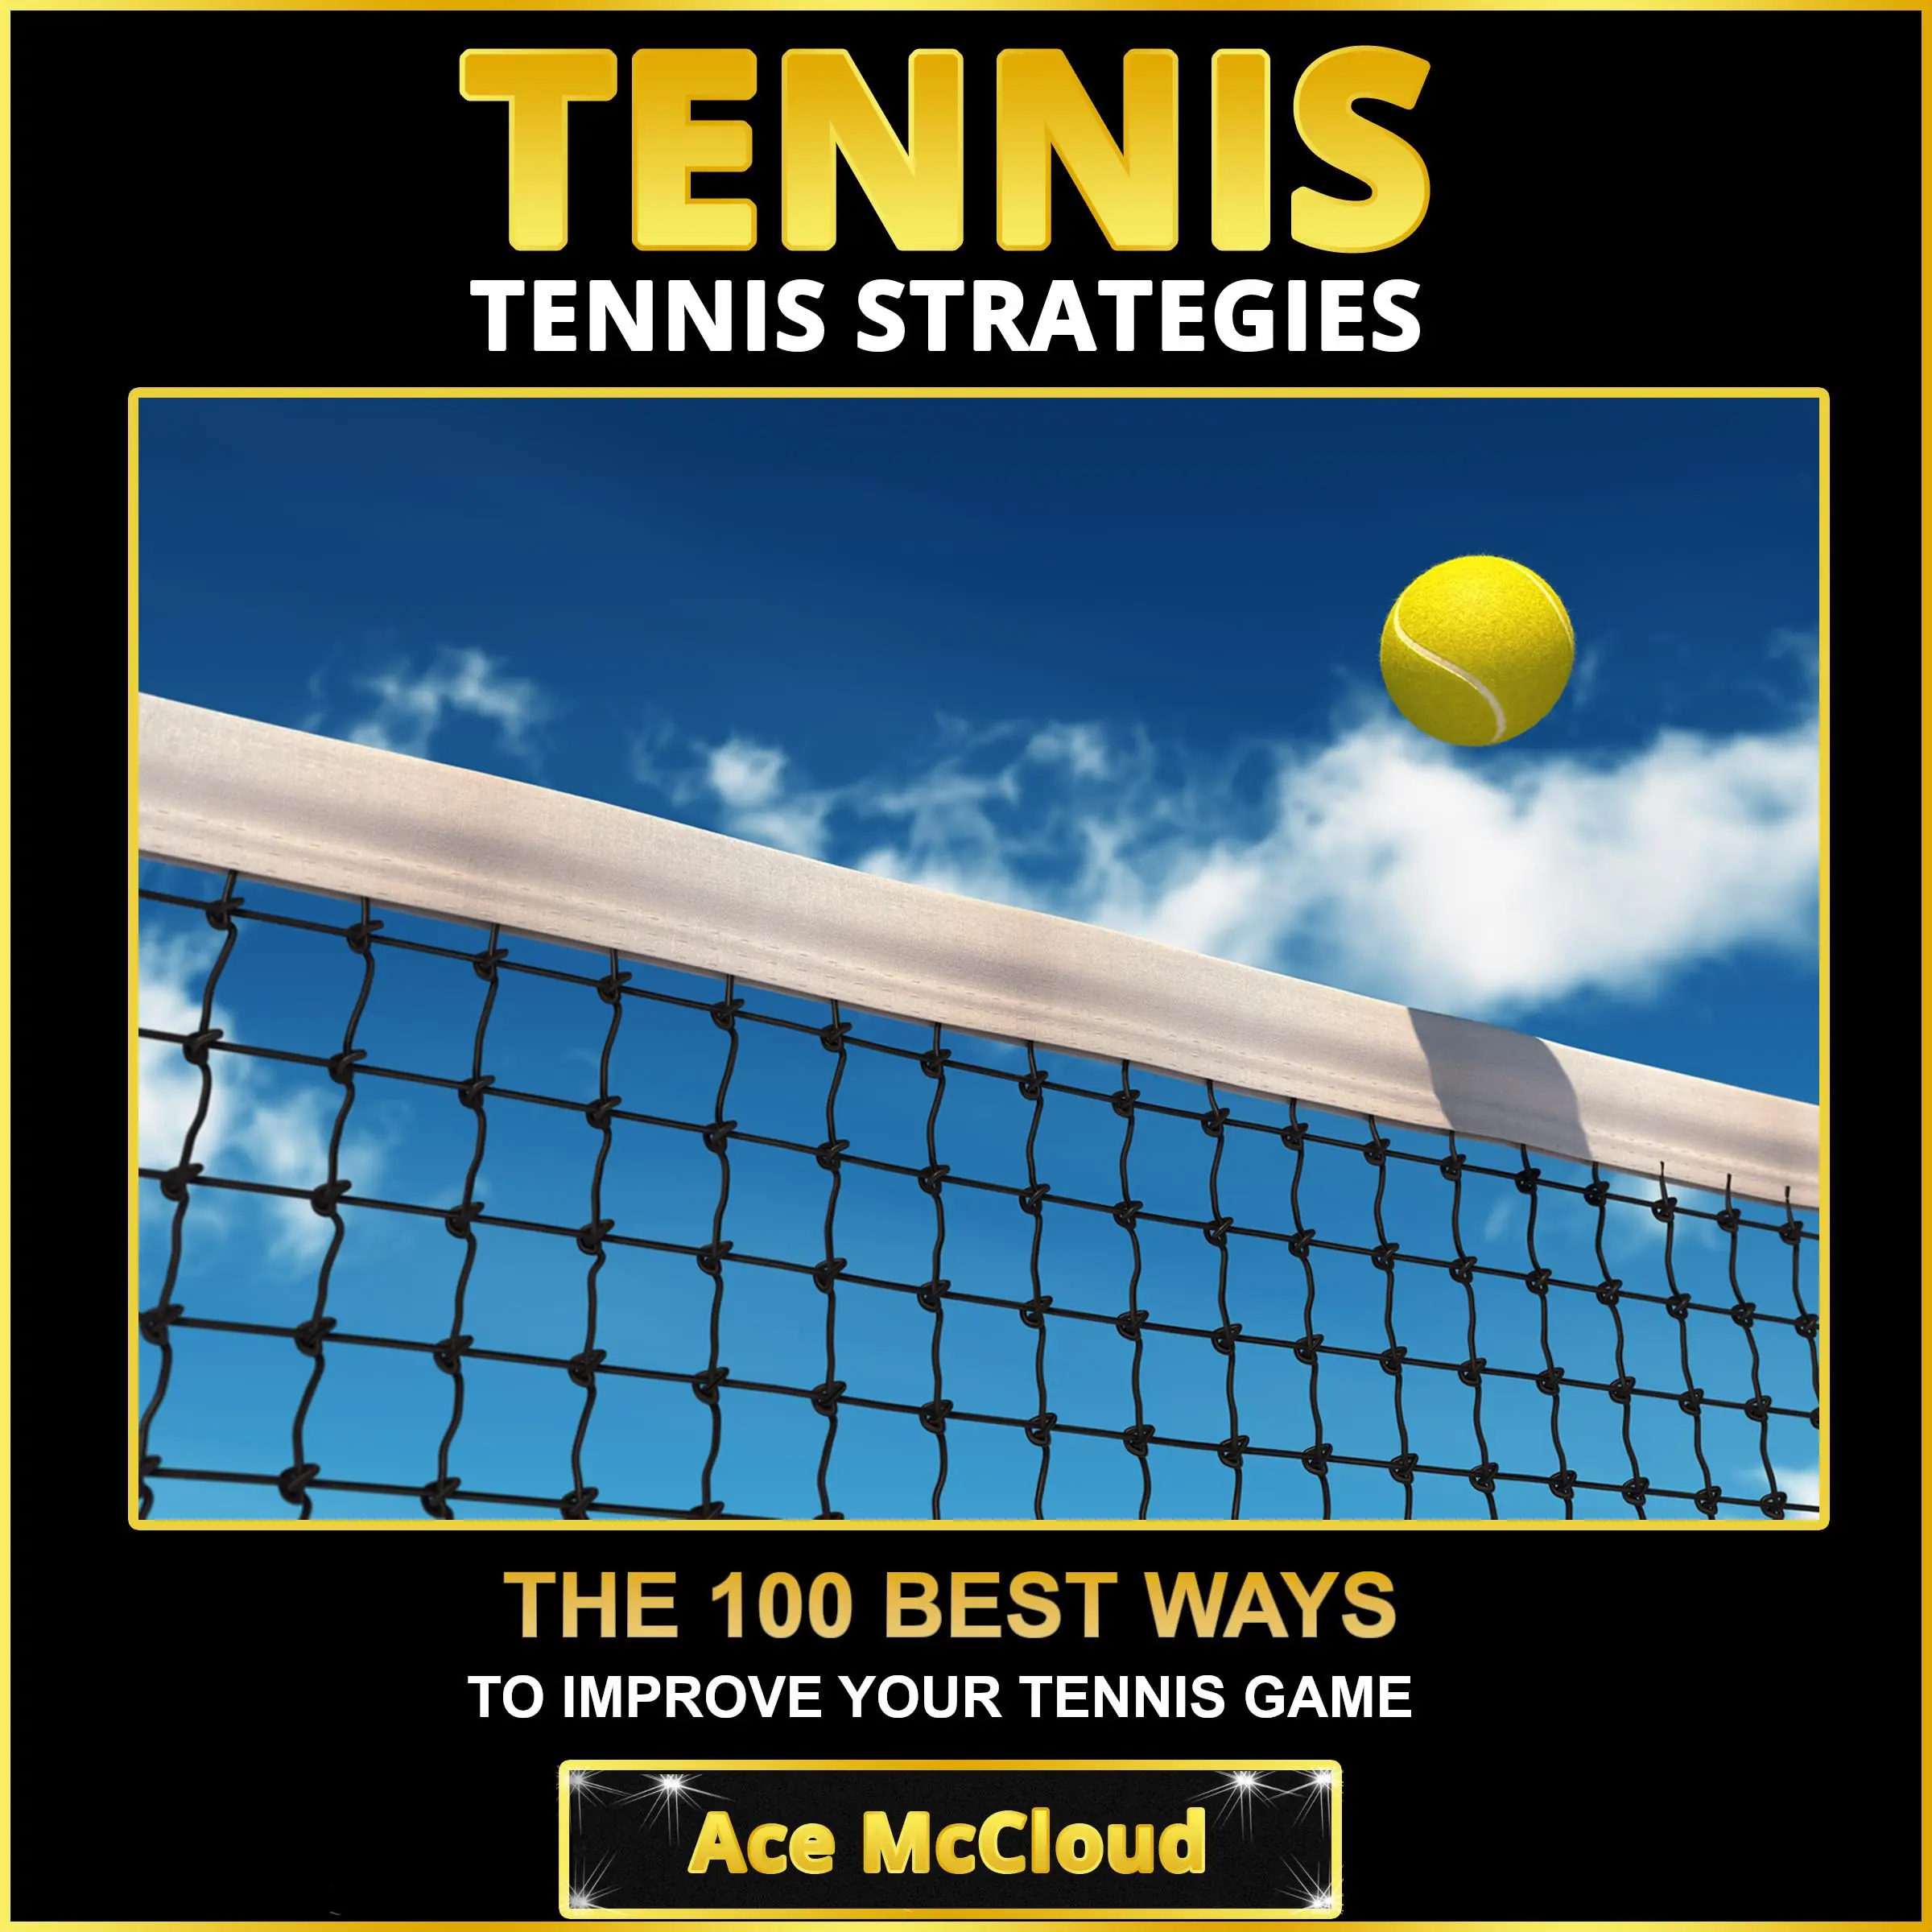 Tennis: Tennis Strategies: The 100 Best Ways To Improve Your Tennis Game by Ace McCloud Audiobook